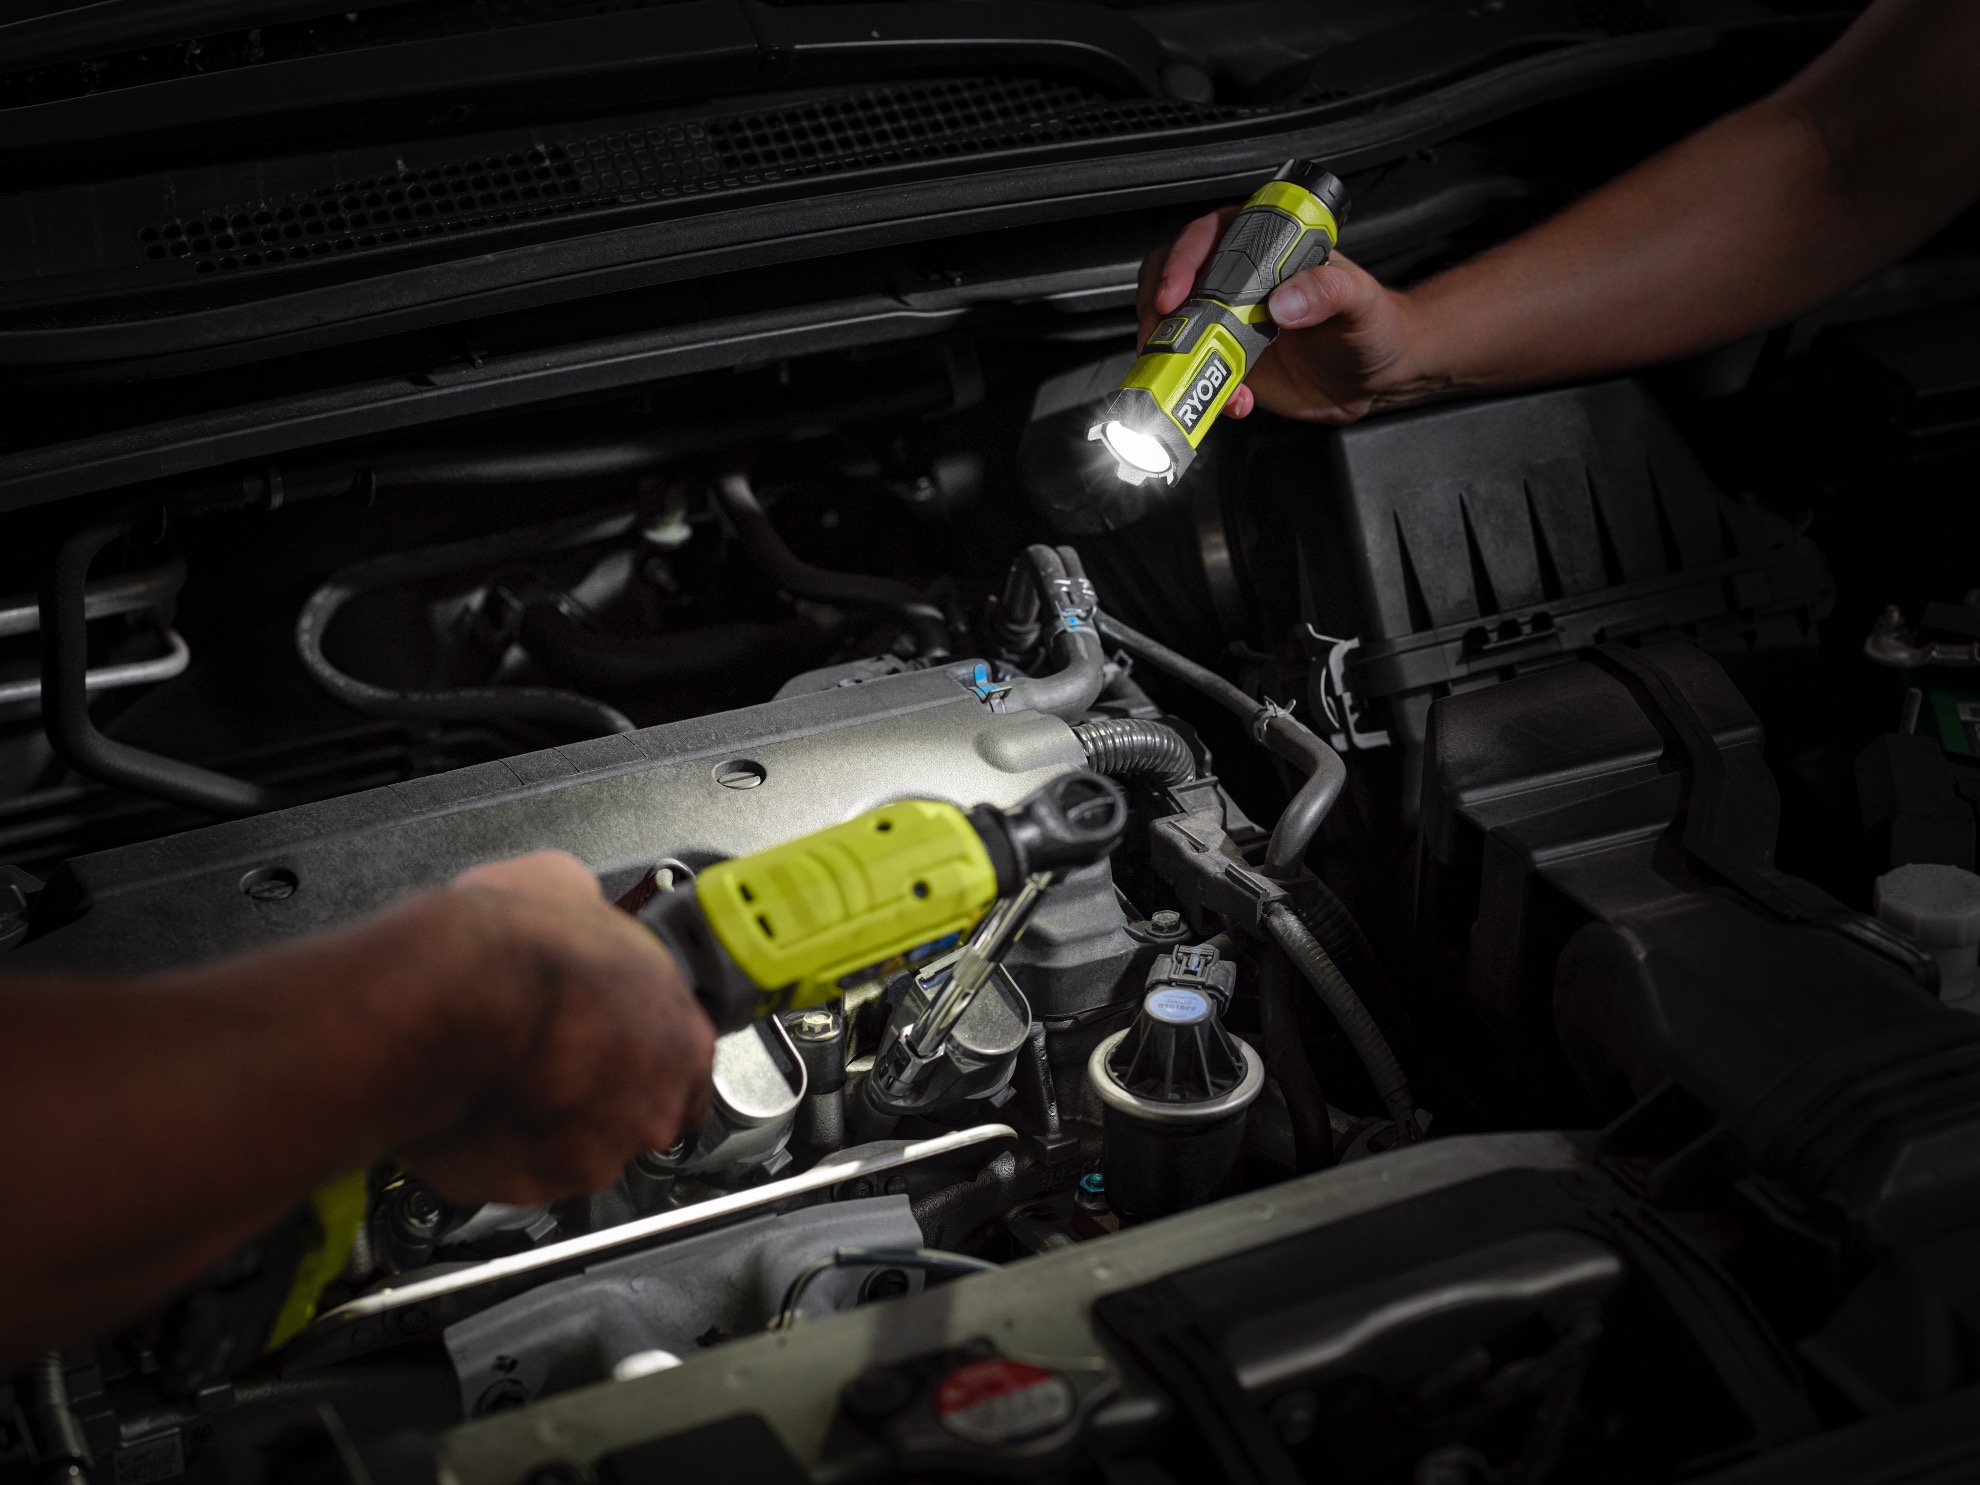 Photo: Powered by the RYOBI USB Lithium Battery System 